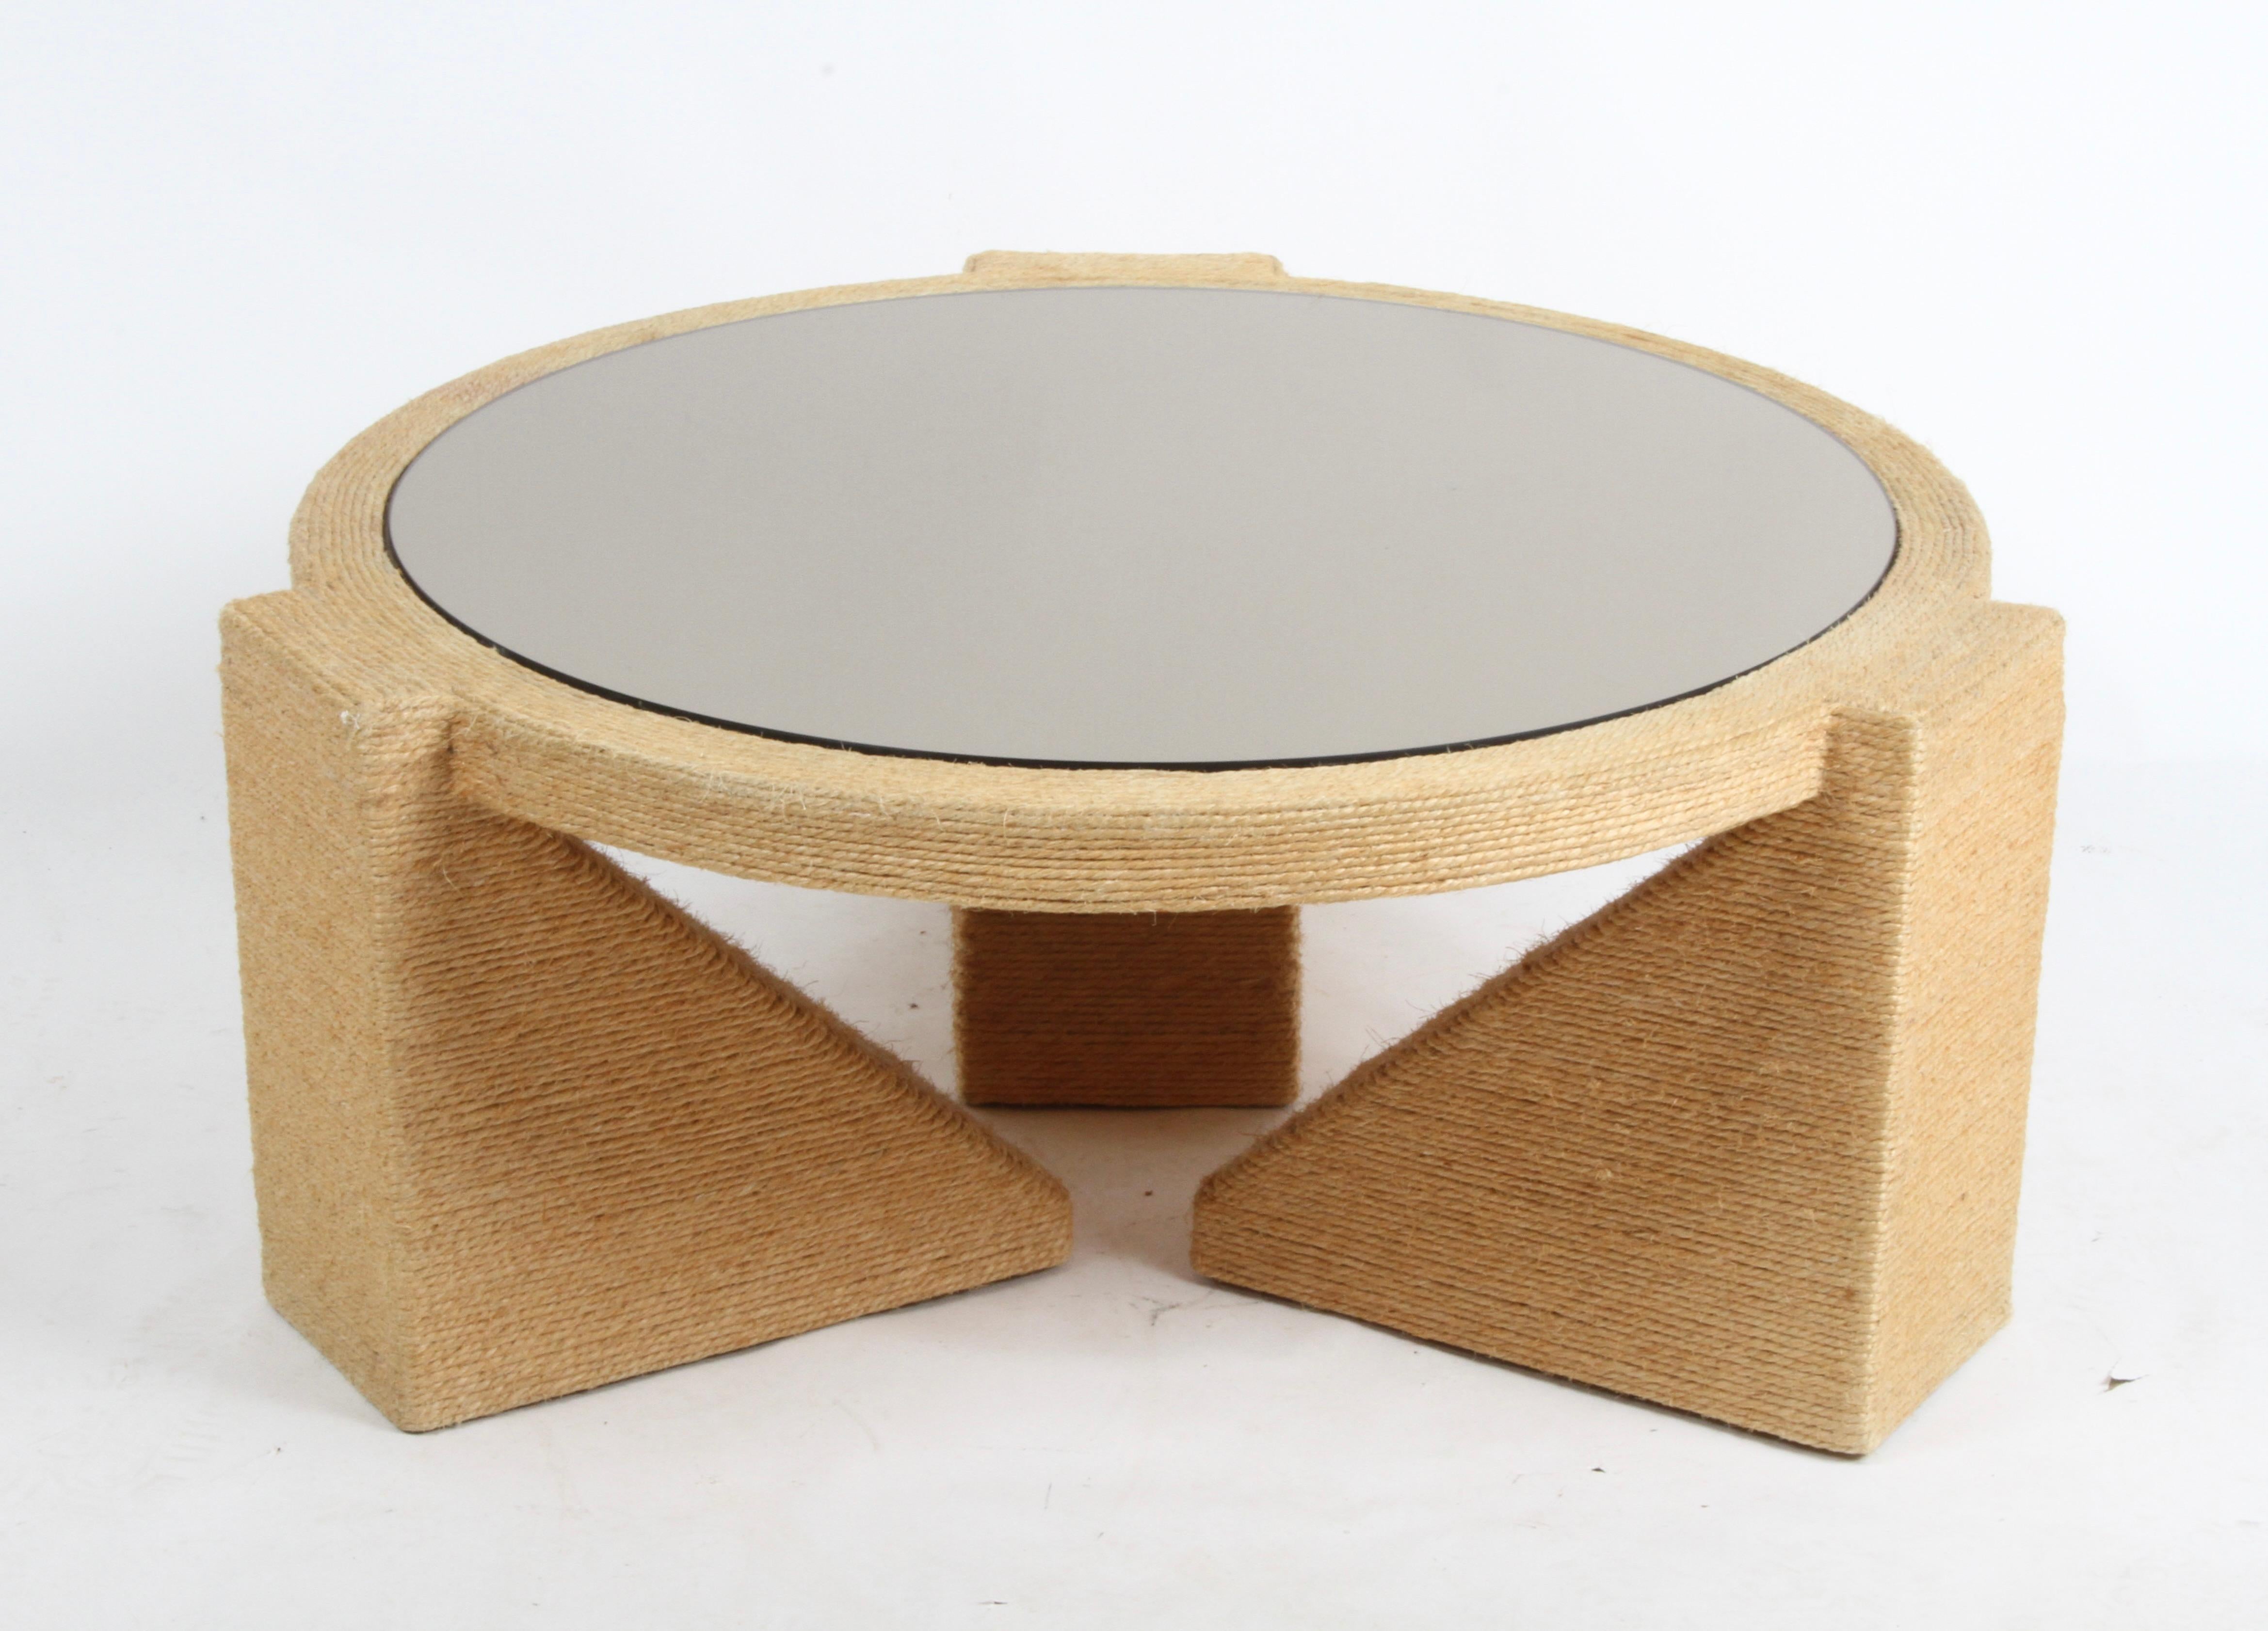 Fabulous 1970's Mid-Century Modern sculptural round coffee table wrapped in a thin jute rope over a wood frame with bronze mirror top. Branded on the bottom, BLOOM furniture, didn't find anything on this company, but absolute vintage 70's Mirror top